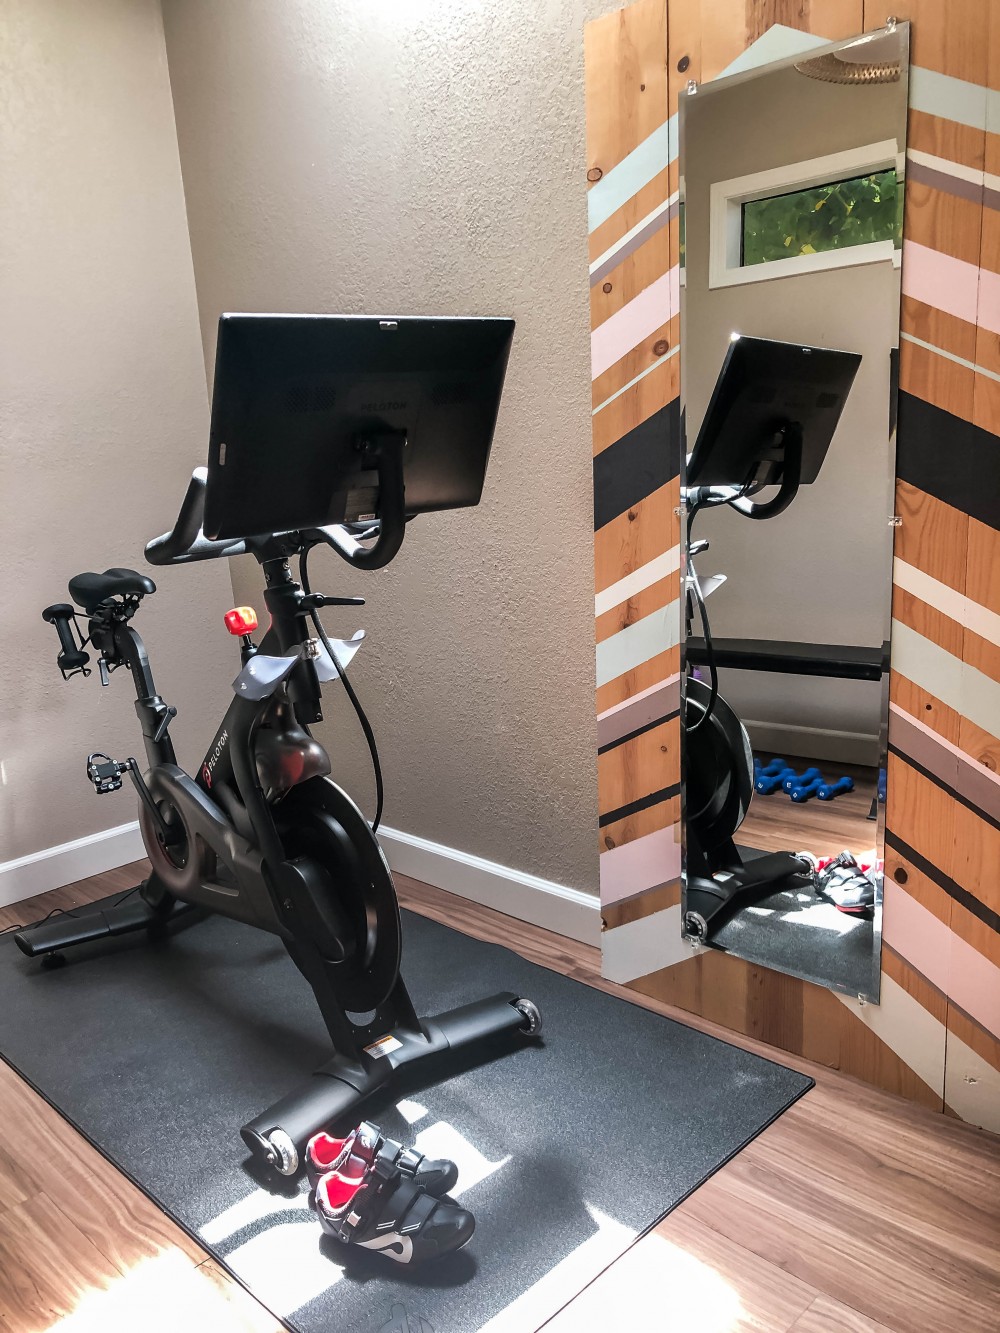 Honest Peloton Bike Review + Home Gym Reveal - Have Need Want